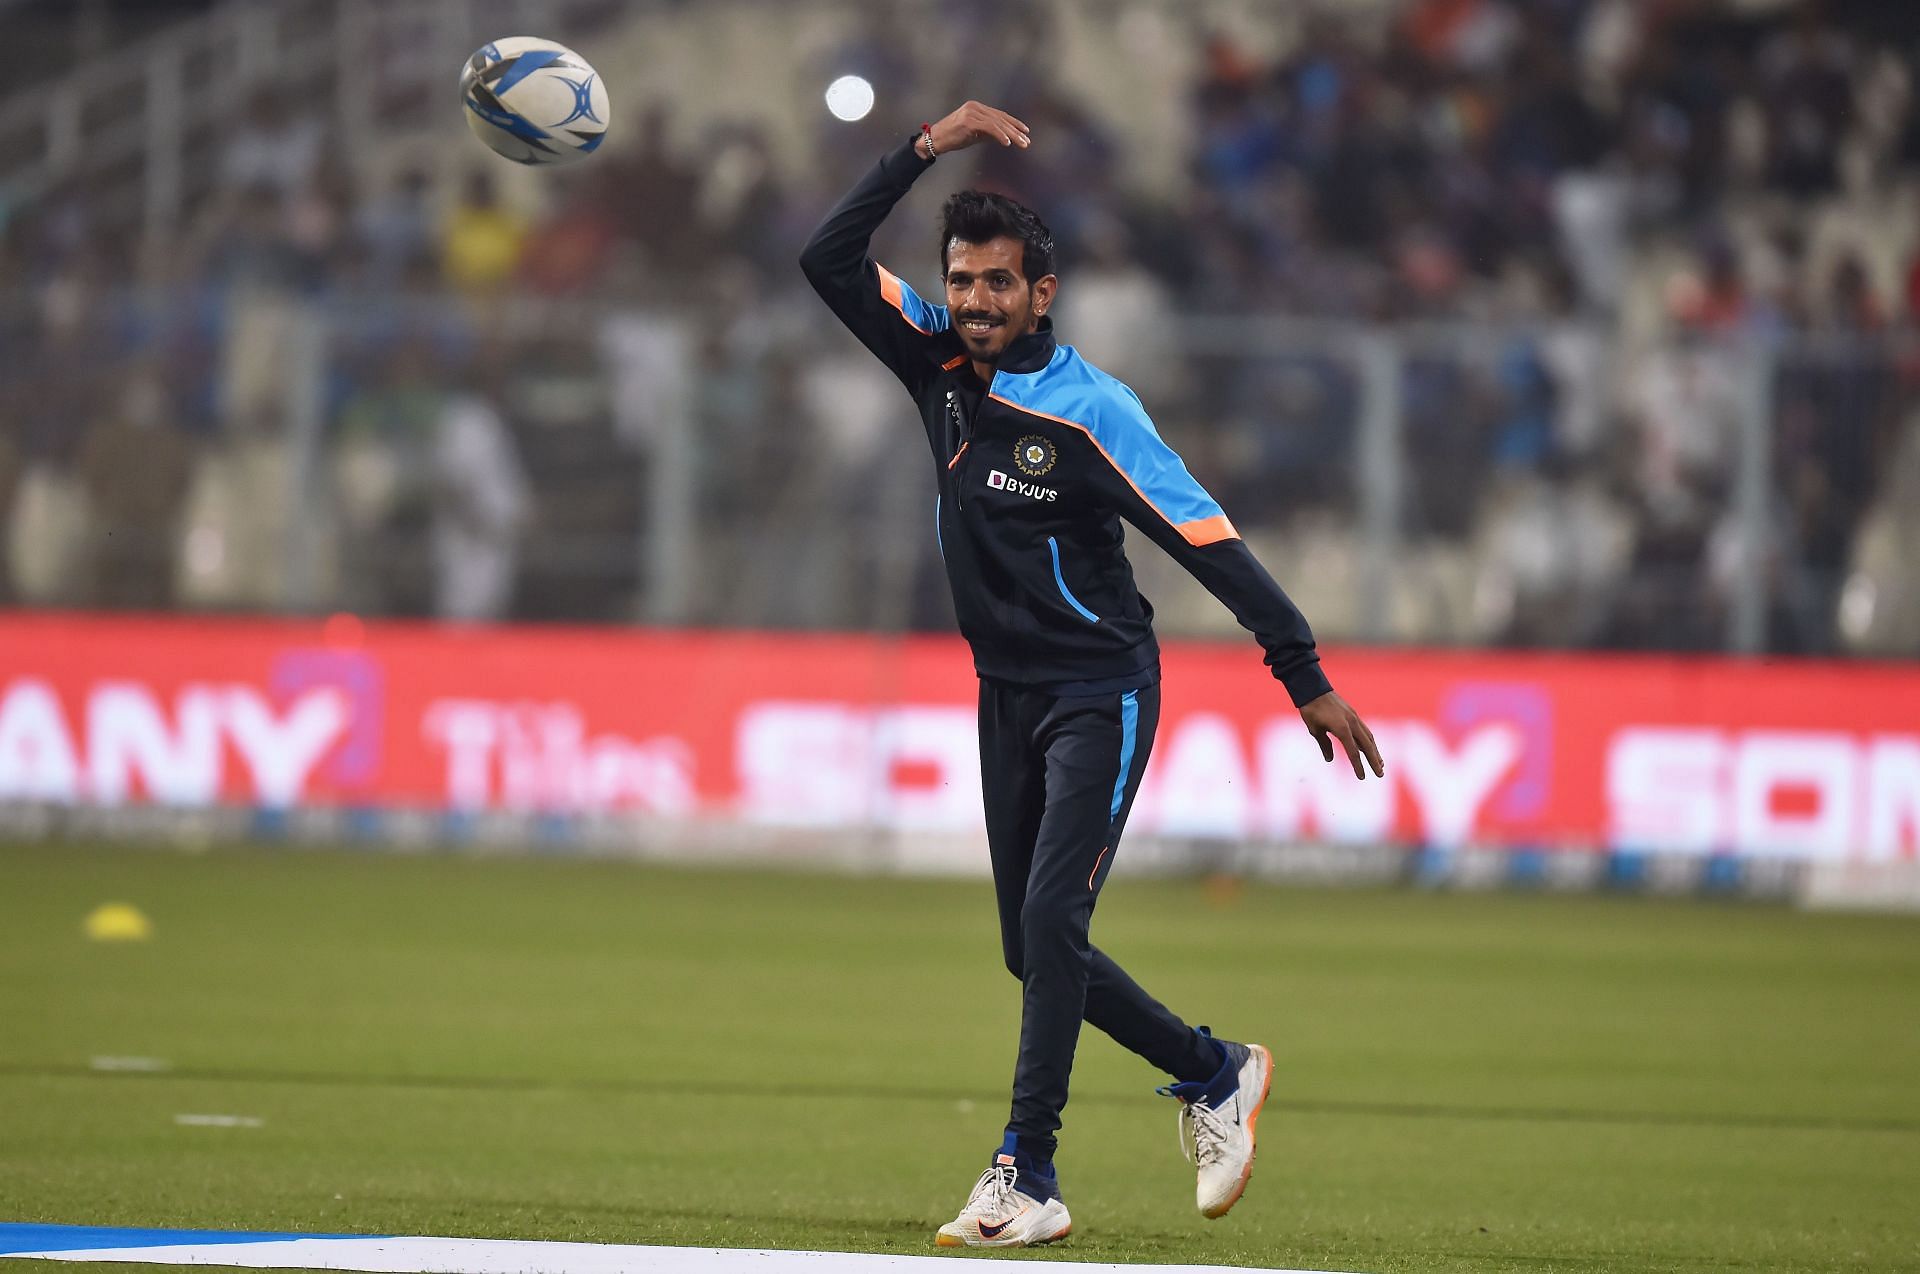 Chahal will be keen to continue his IPL form